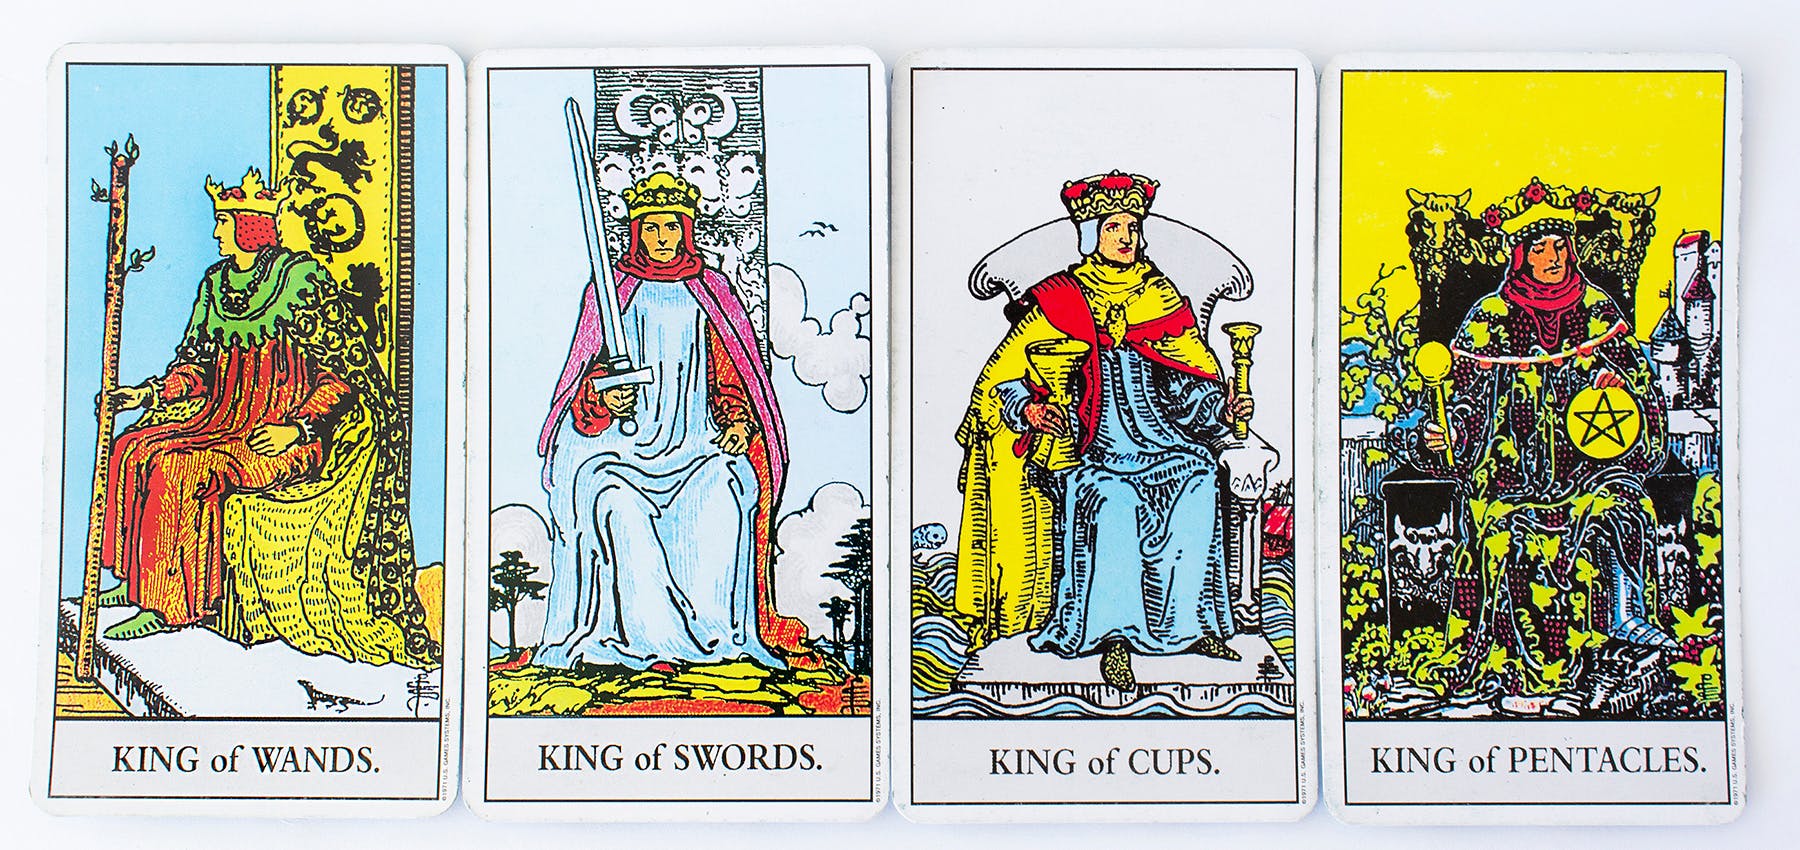 Examples of the Minor Arcana cards, includes an image of the King of wands, King of swords, king of cups, and the king of pentacles.